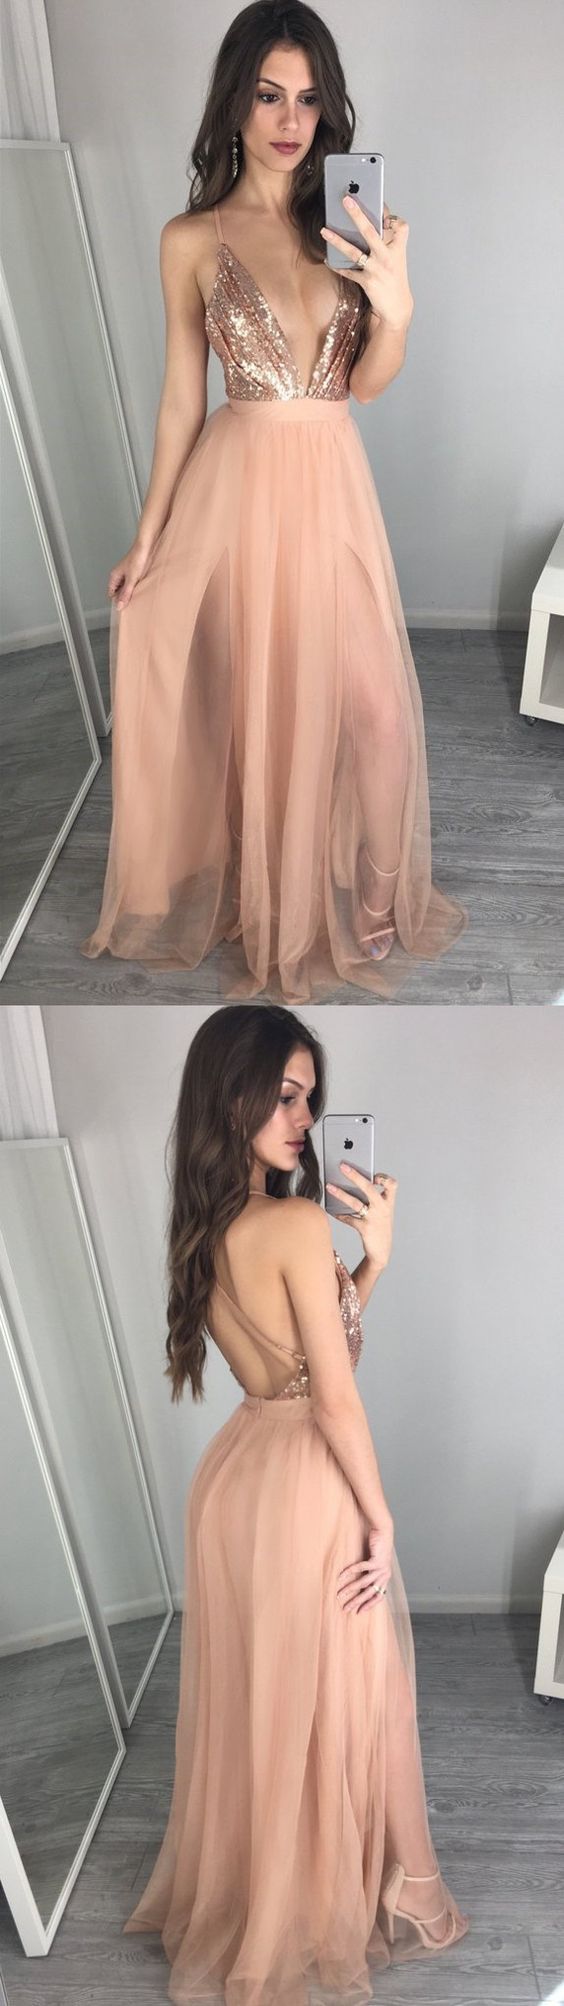 Sexy V Neck Sequin Top Prom Dresses Nude Tulle Prom Dresses Prom Dresses Popular Prom On Luulla 